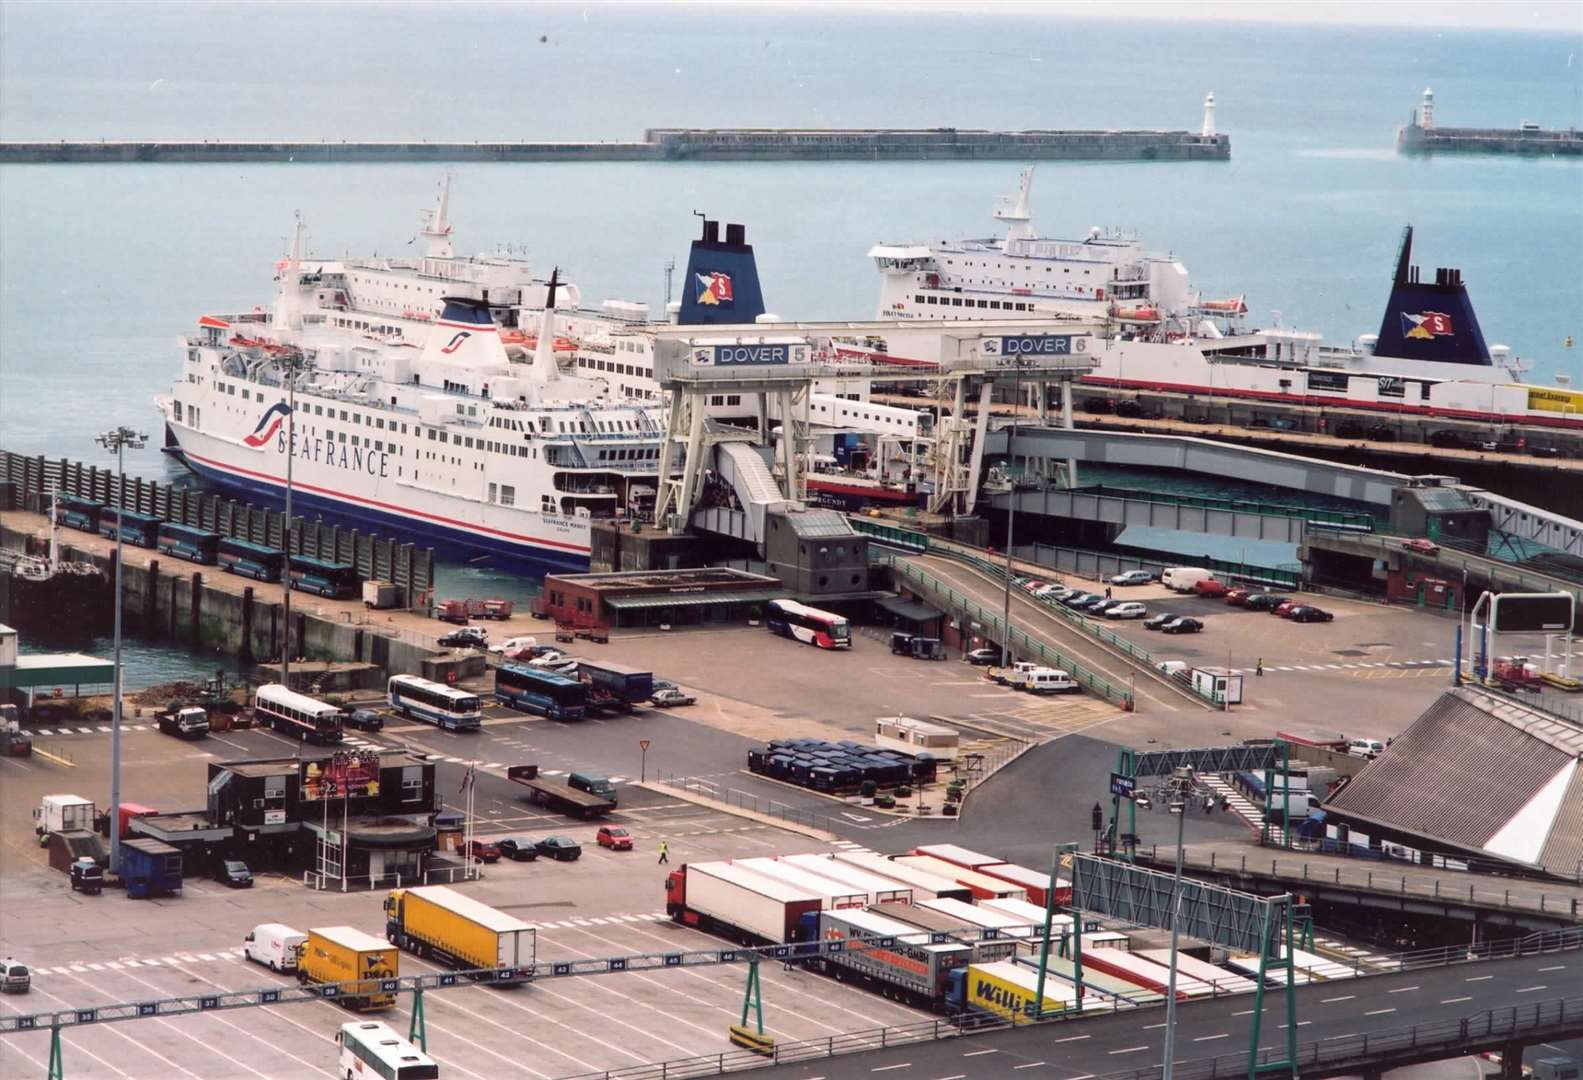 A Seafrance ship can be seen in this picture overlooking the Port of Dover in 1999. The French company began operations in Dover in 1996 and ran services across the Channel before going into liquidation in 2012